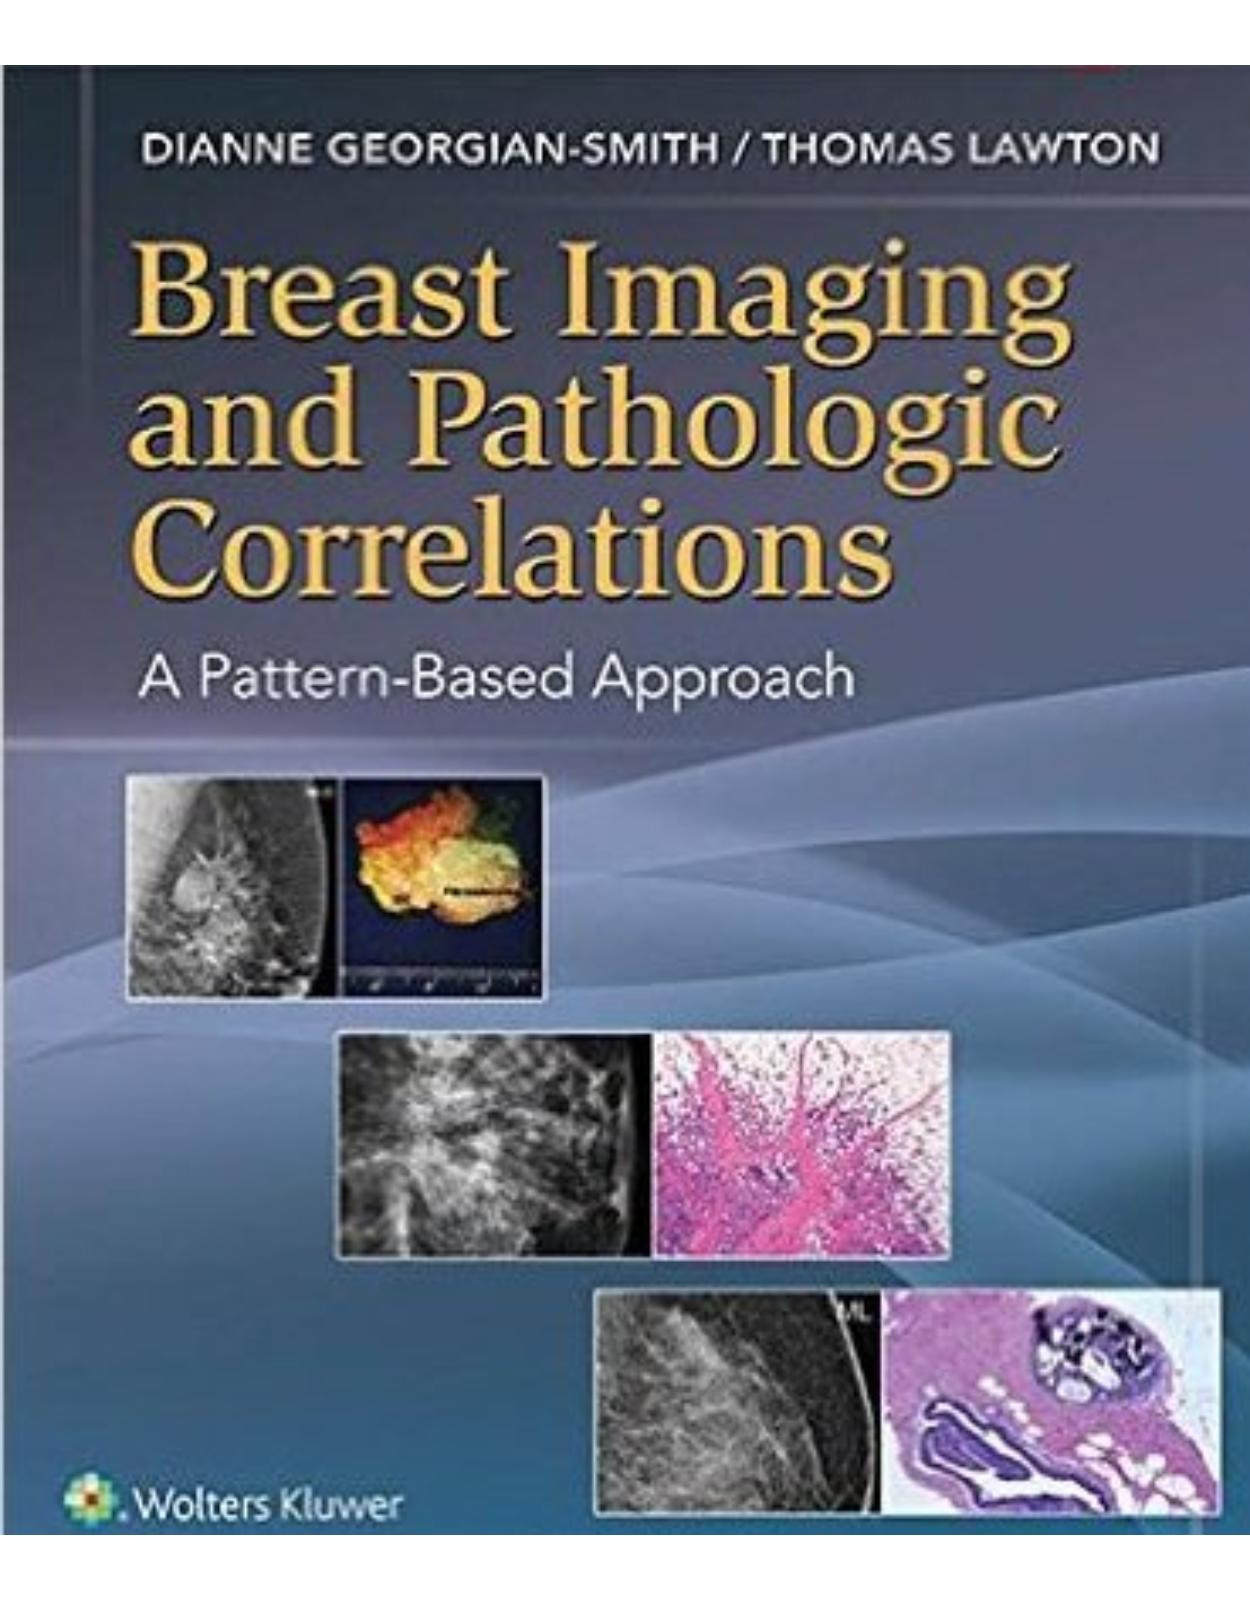 Breast Imaging and Pathologic Correlations: A Pattern-Based Approach First Edition